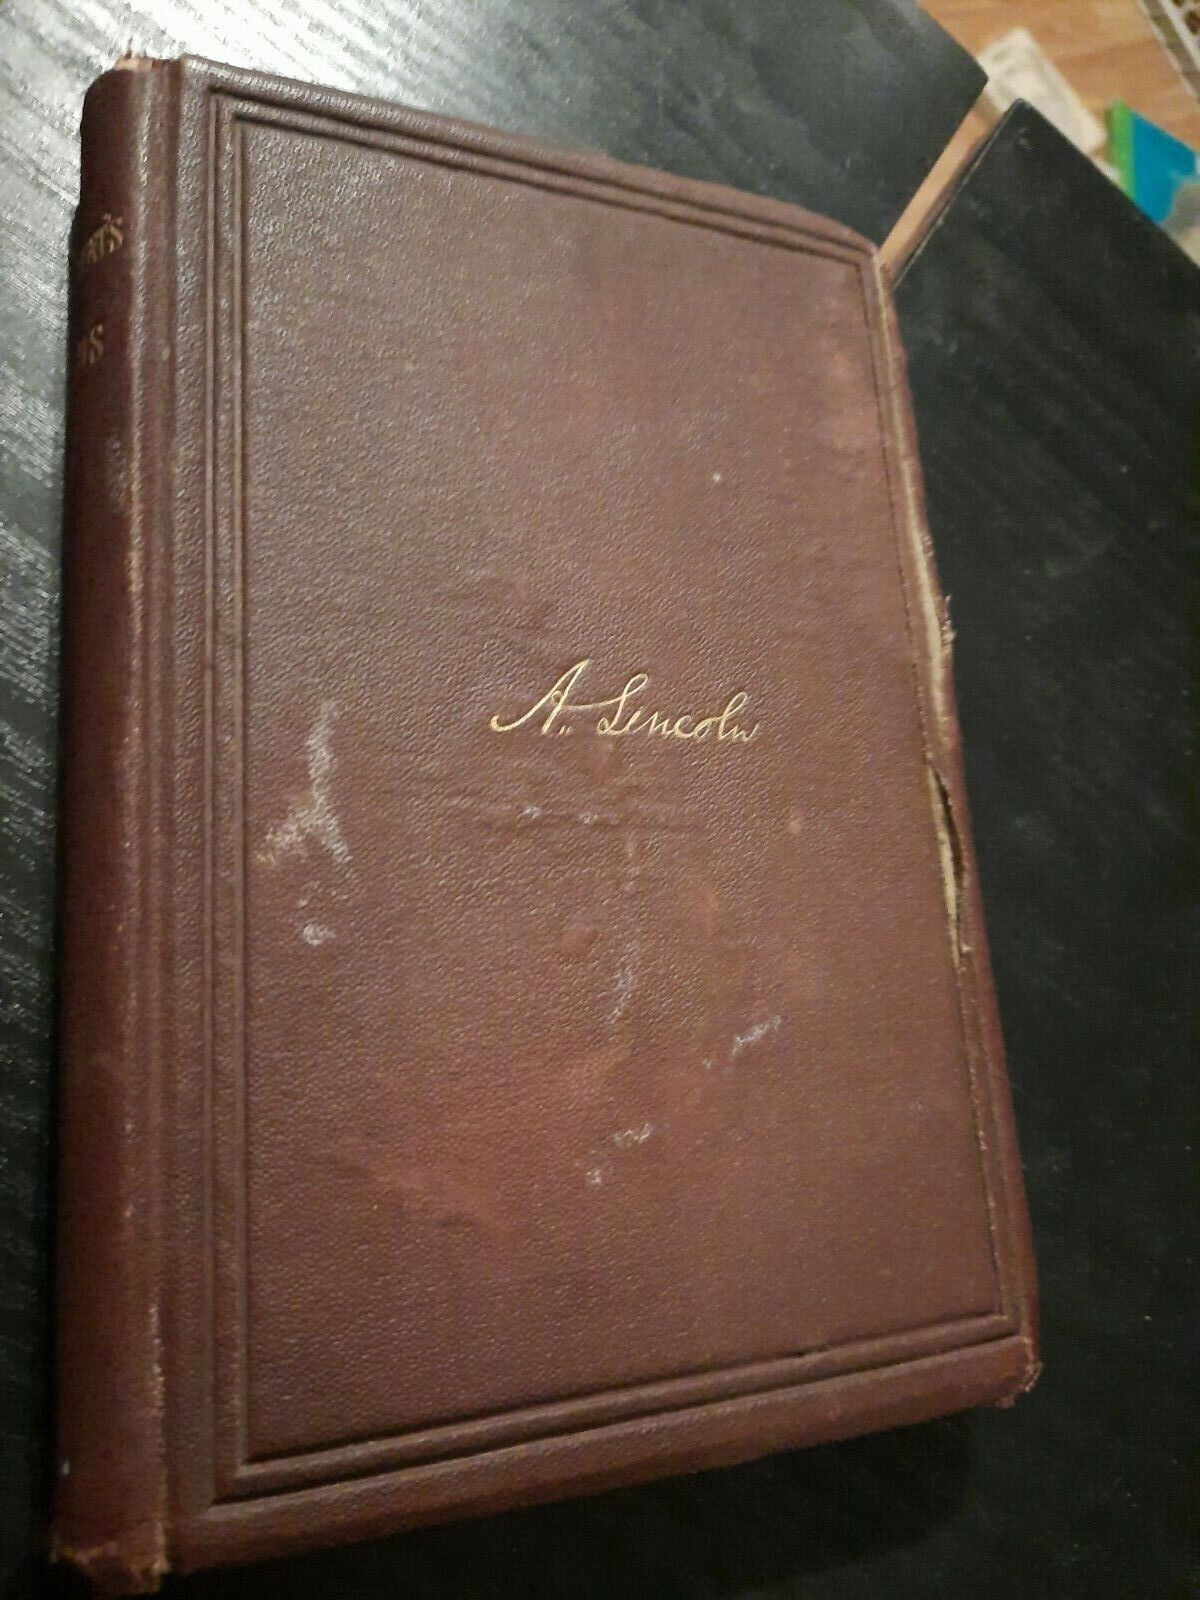 ABRAHAM LINCOLN - THE PRESIDENT'S WORDS 1865 FIRST EDITION BOOK VERY RARE 